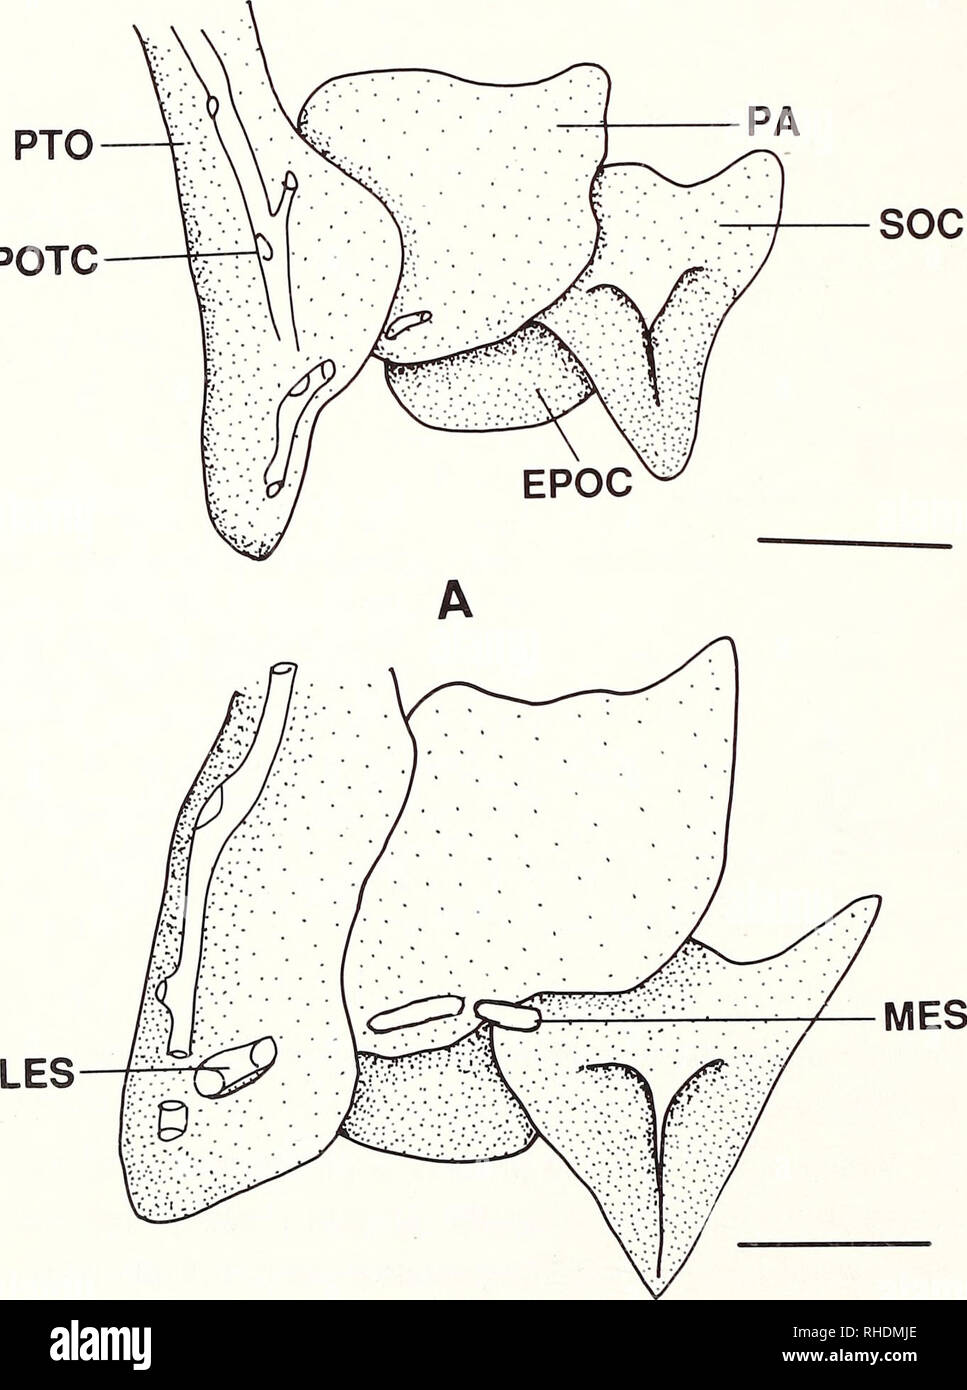 . Bonner zoologische Monographien. Zoology. Fig.43: Lateral view of ptero- sphenoid of (A) Phoxinus cumberlandensis (KU 18934, 52.0 mm SL) and (B) P. pho- xinus (CNUC uncat., 76.0 A B mm TL). Scale bar = 1 mm. stefior portion of the bone bears a process in P. oreas, issykkulensis, tennesseensis, eos, neogaeus, brachyurus, phoxinus, and in the outgroups (TS 65[0]), although the process is absent in P. cumberlandensis and erythrogaster (TS 65[1]). The pterosphenoid's ventroposterior margin sutures with anterior edge of the parasphe- noid's ascending wing (Fig.42A-D). Variation in Phoxinus is pre Stock Photo